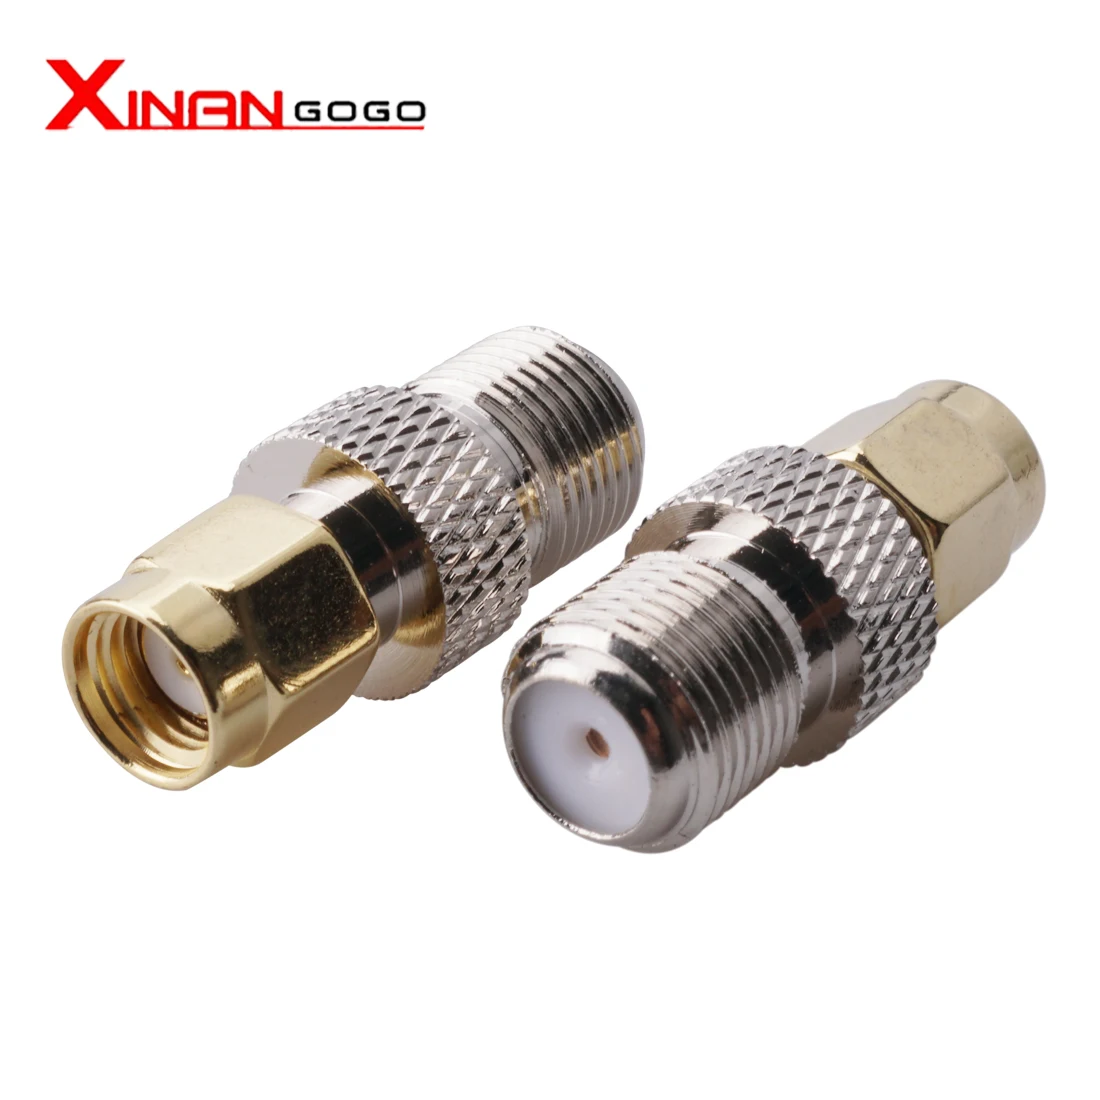 xinangogo-2pcs-rp-sma-male-to-f-female-adapter-f-type-to-sma-connector-rf-coaxial-adapter